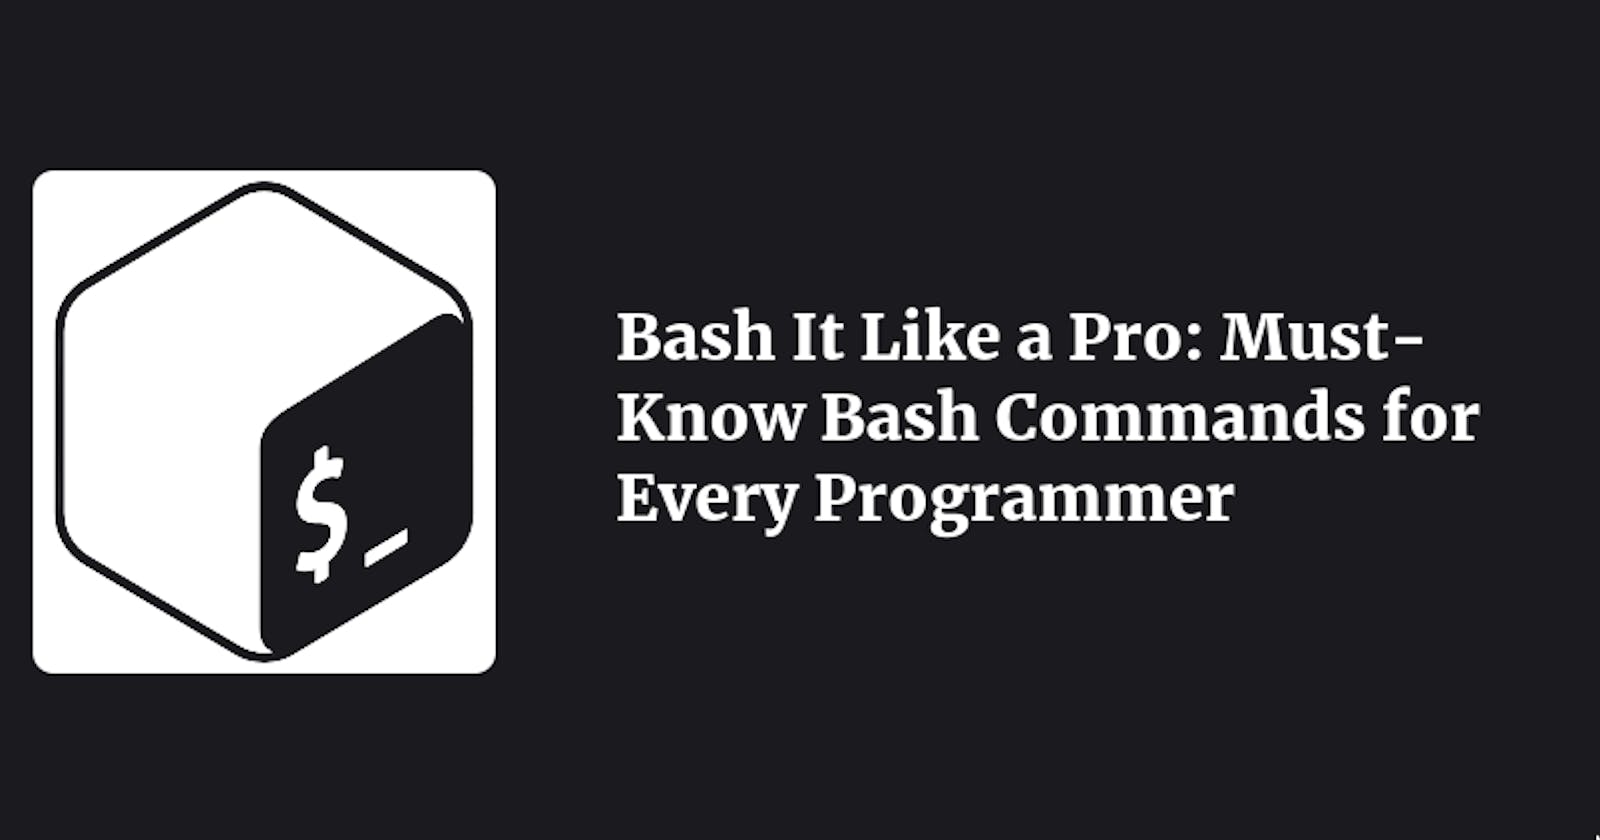 Bash It Like a Pro: Must-Know Bash Commands for Every Programmer